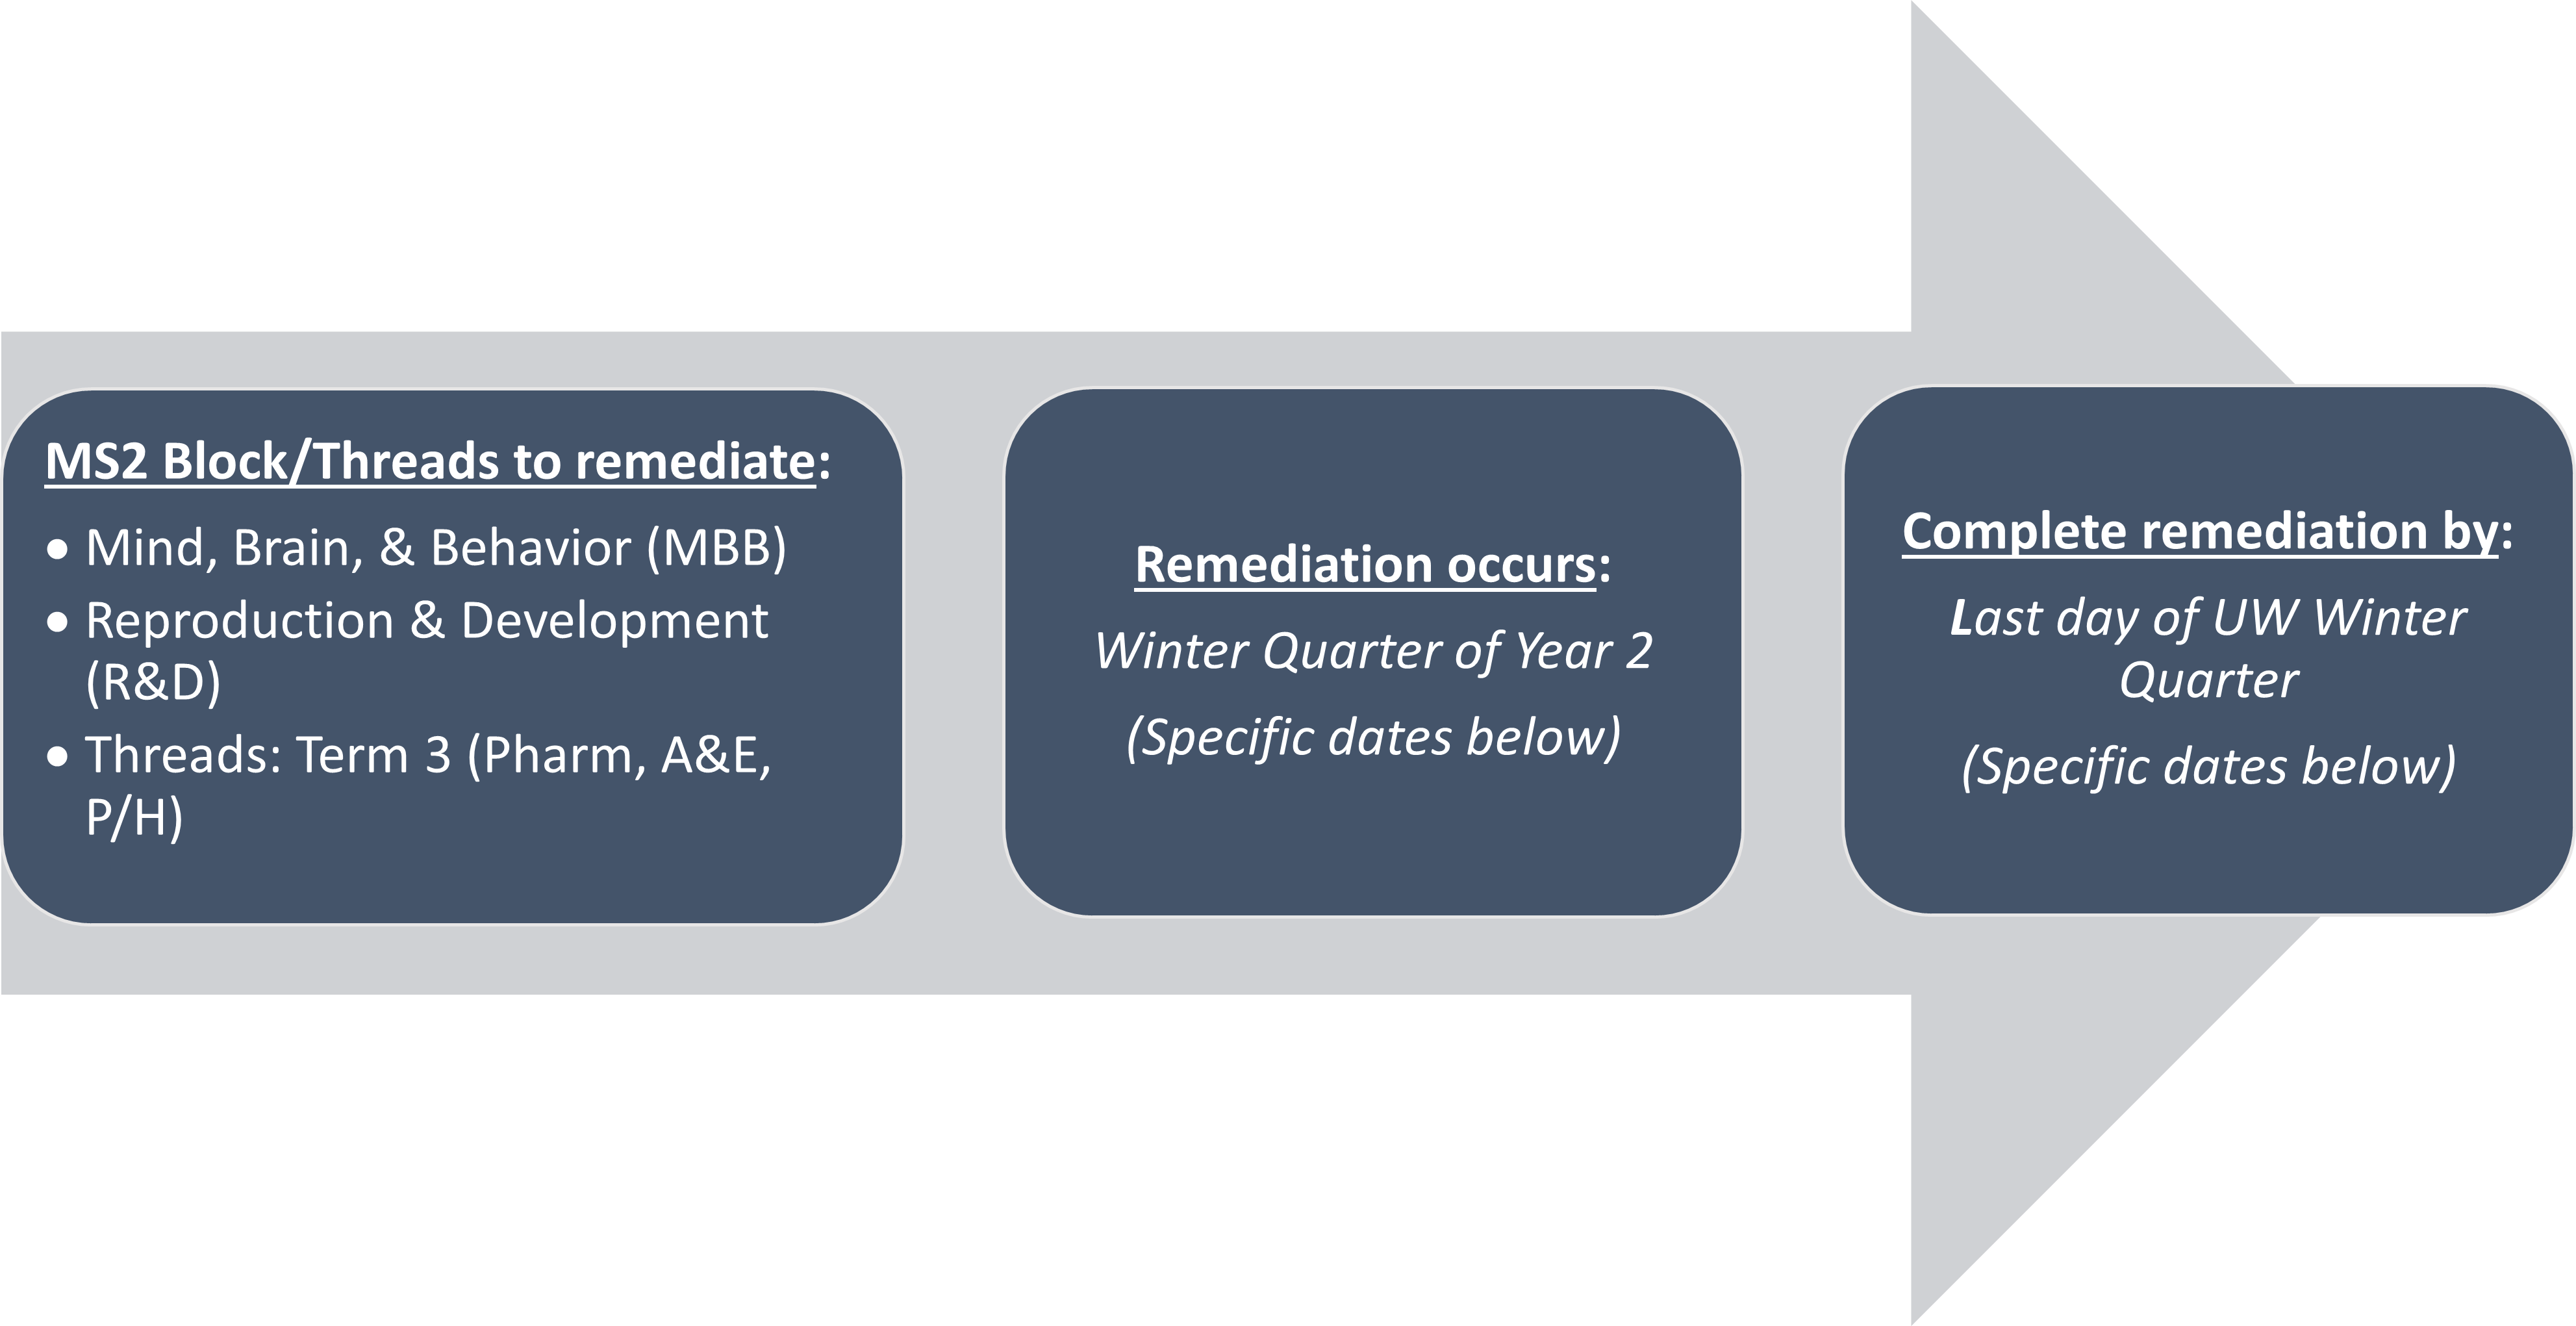 Timeline showing the courses and quarters for remediation for MS2s.